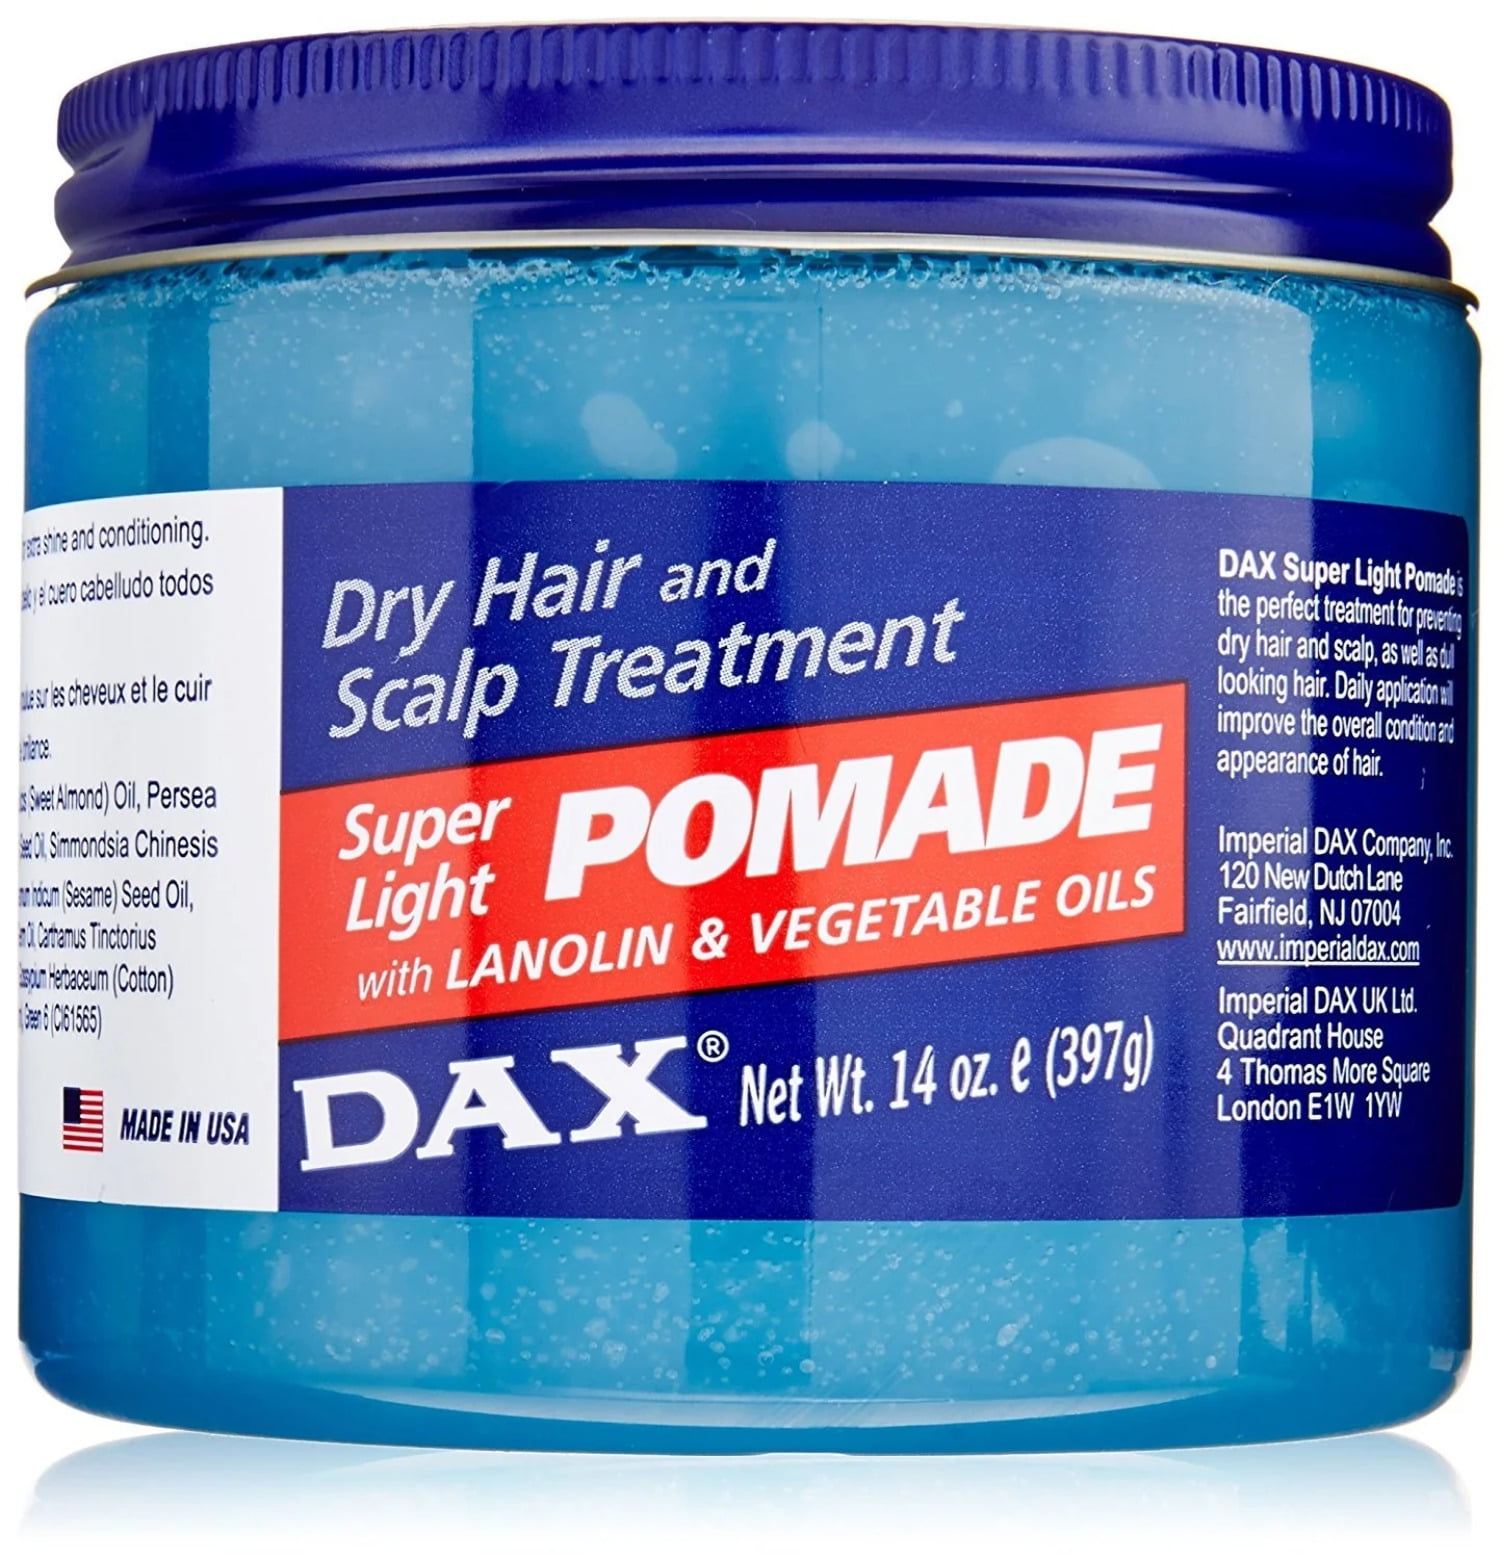 4th Ave Market: Dax Pomade, 3.5 Ounce